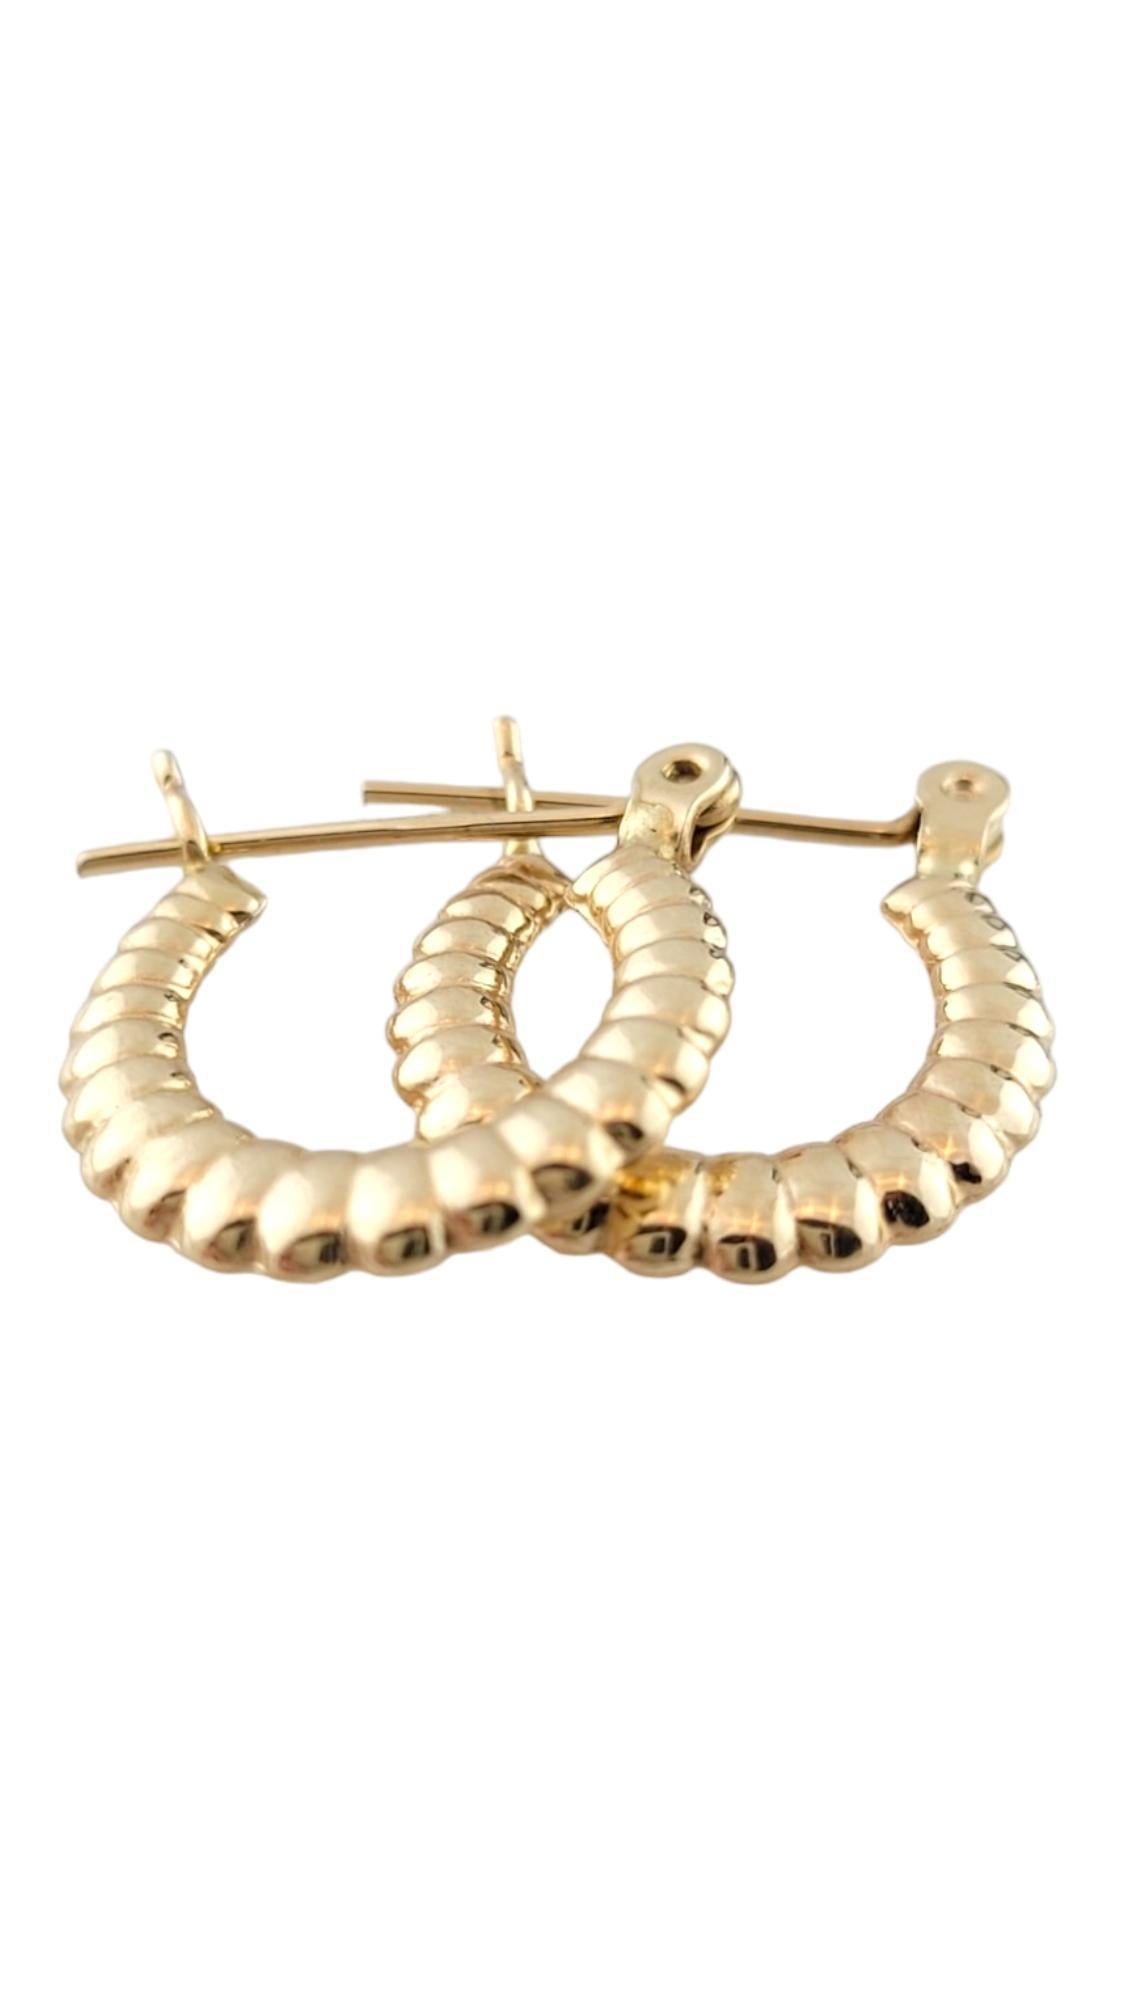 Vintage 14K Yellow Gold Small Bubble Hoop Earrings 

This adorable set of small hoops have a beautiful, bubbled pattern and is made from 14K yellow gold!

Diameter: 14.2mm 
Width: 1.87mm

Weight: 0.6 dwt/ 0.94 g

Hallmark: 14K

Very good condition,